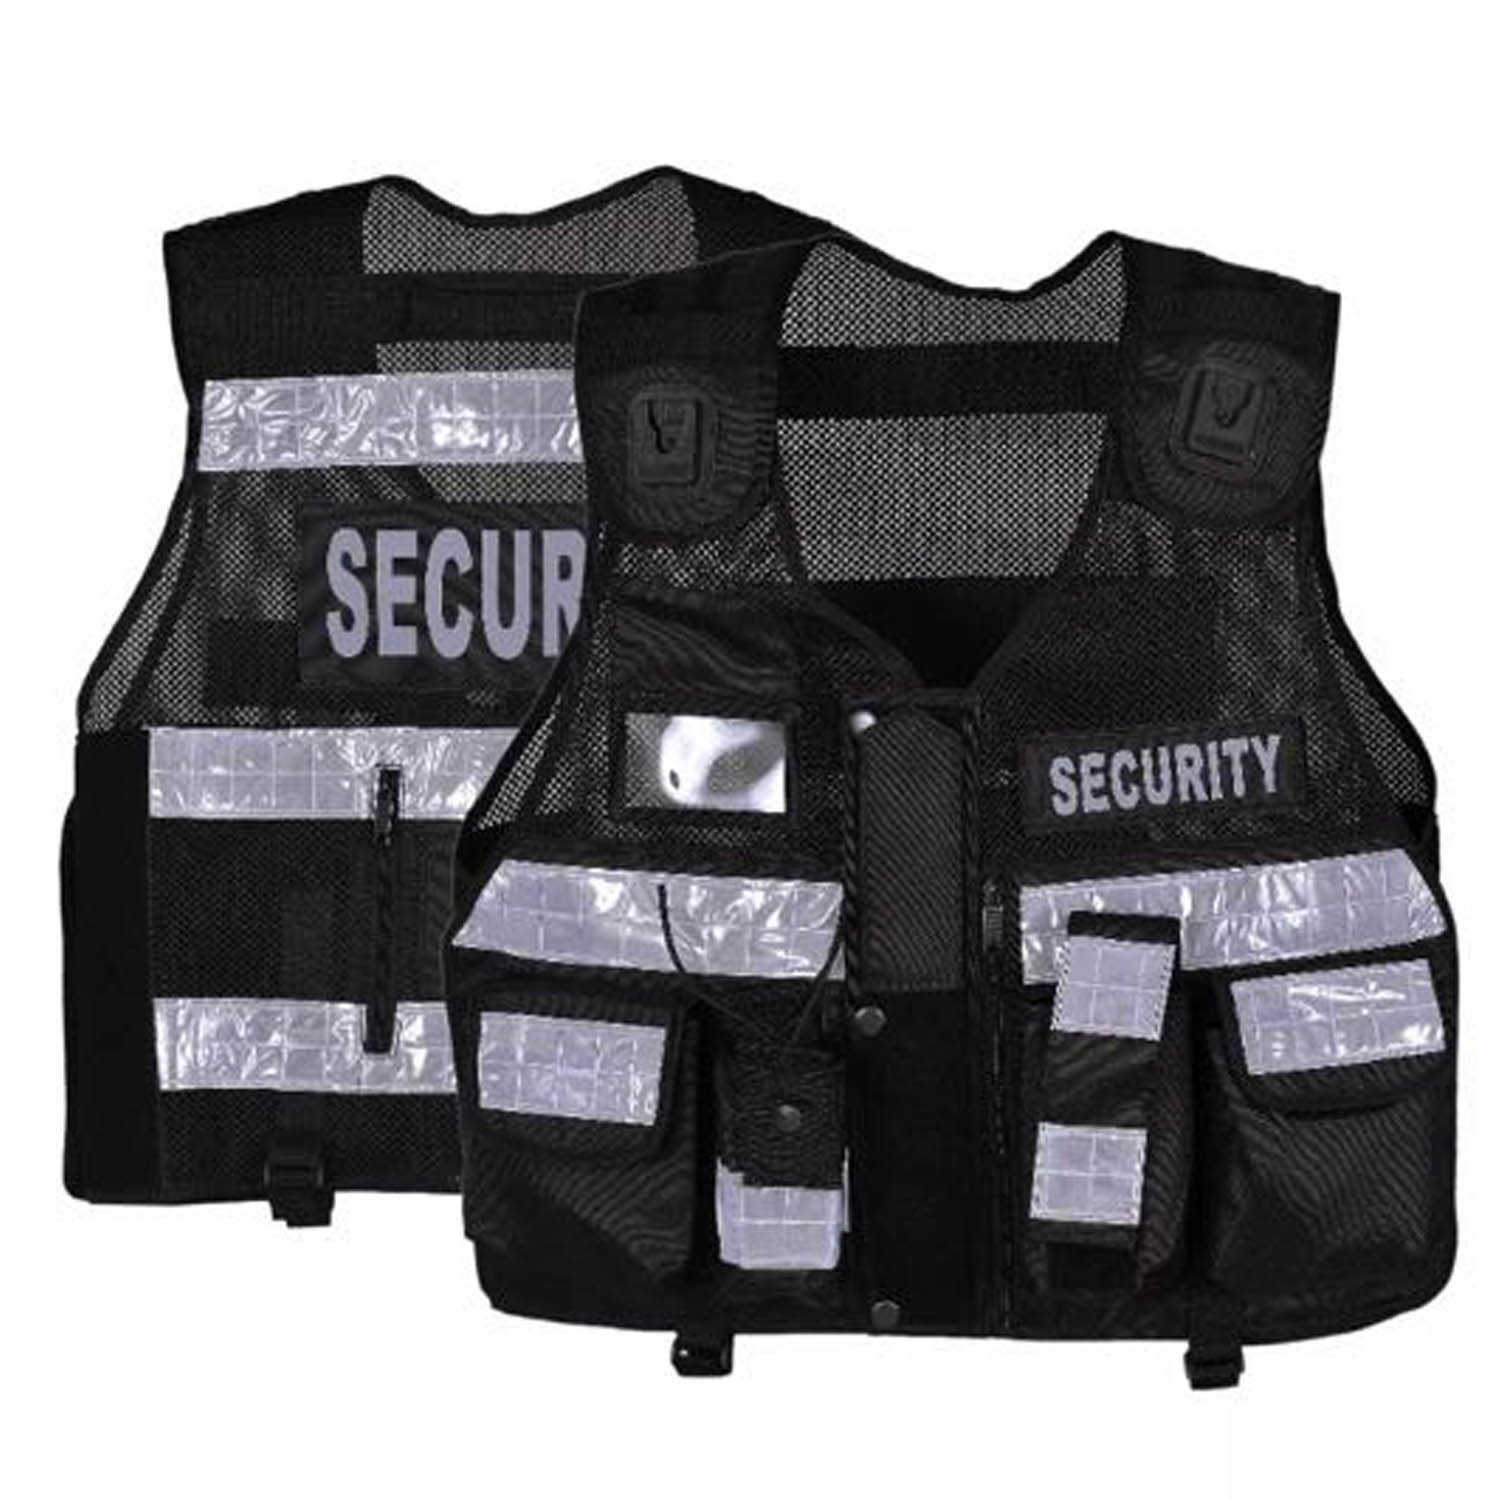 High Visibility Tactical Security Vest Black